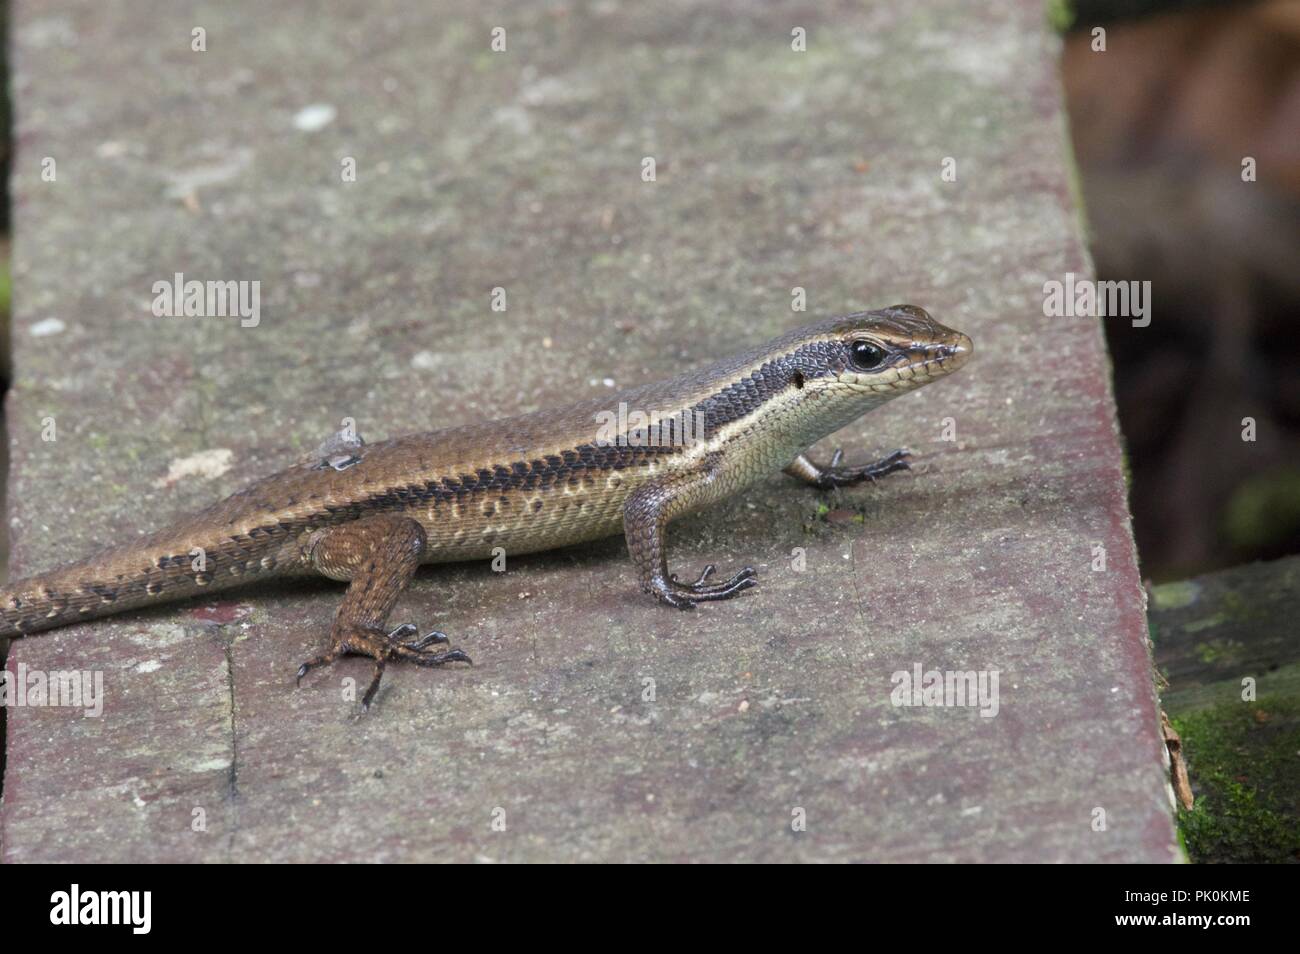 A Rough-scaled Brown Skink (Eutropis rudis) on a paved path in Gunung Mulu National Park, Sarawak, East Malaysia, Borneo Stock Photo